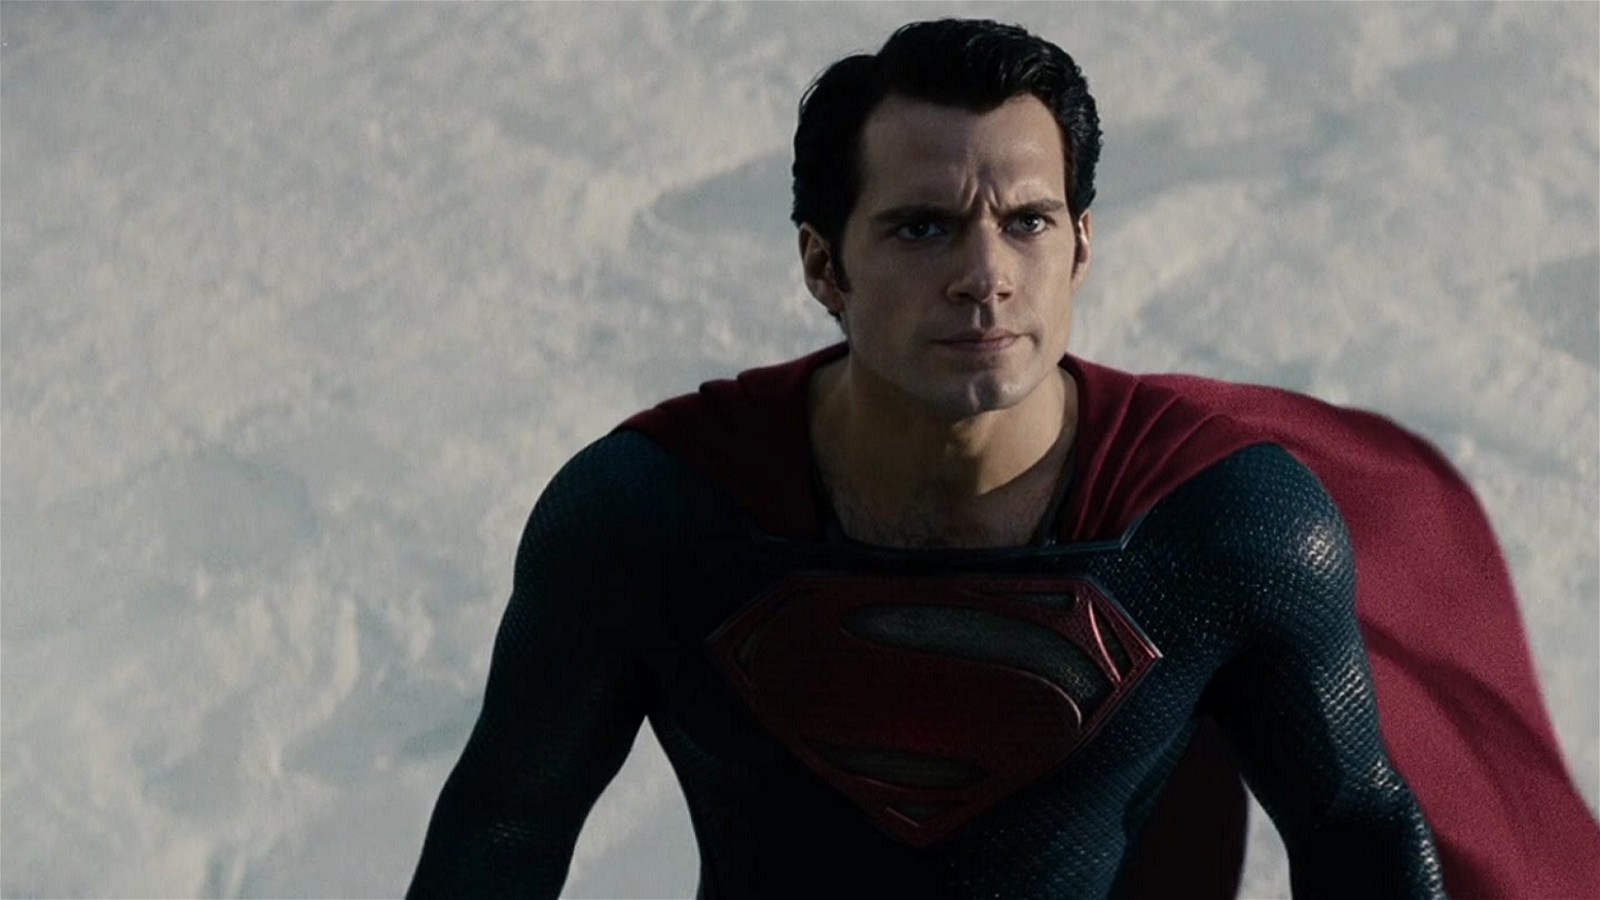 Zack Snyder's DC tenure started with 2013's Man of Steel